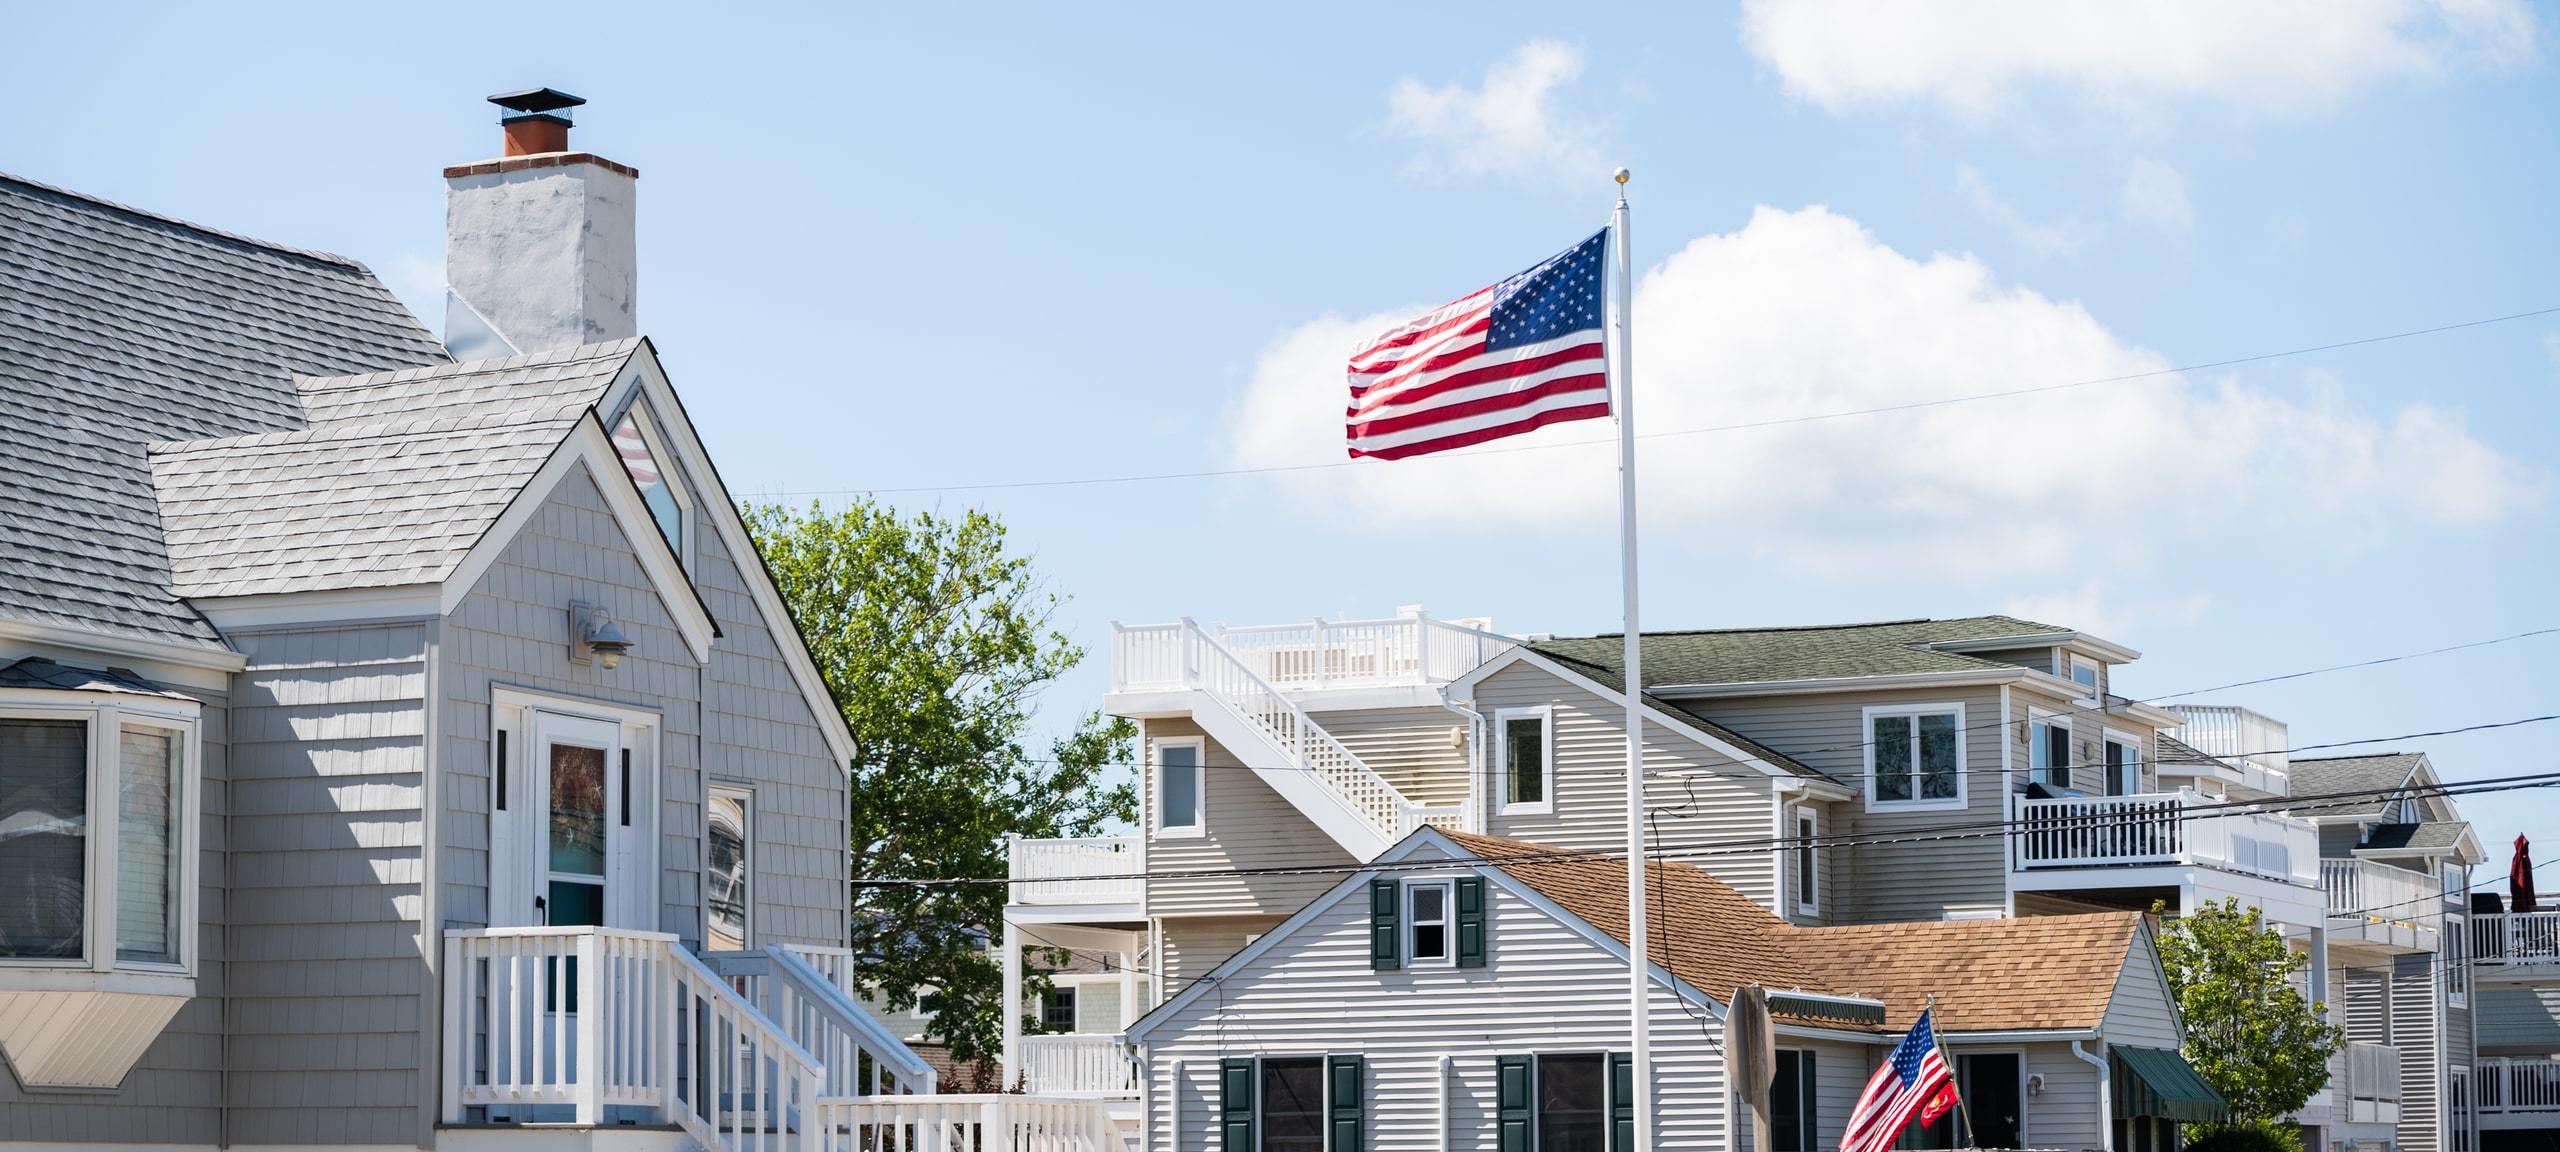 Bright coastal style homes in Jersey Shore community with American flag